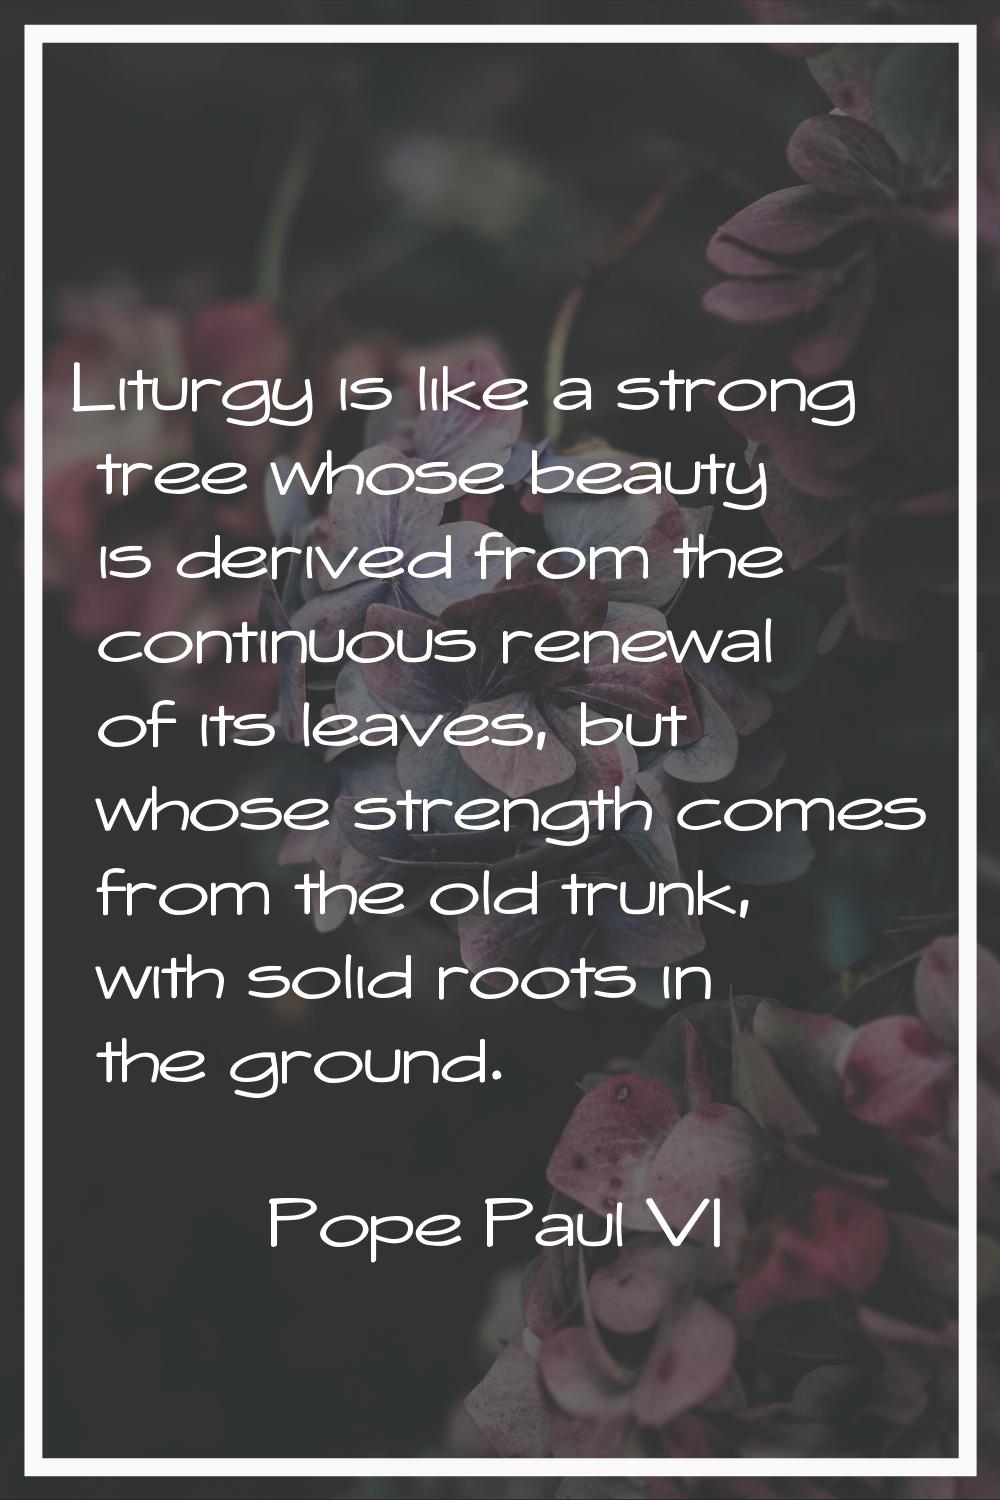 Liturgy is like a strong tree whose beauty is derived from the continuous renewal of its leaves, bu